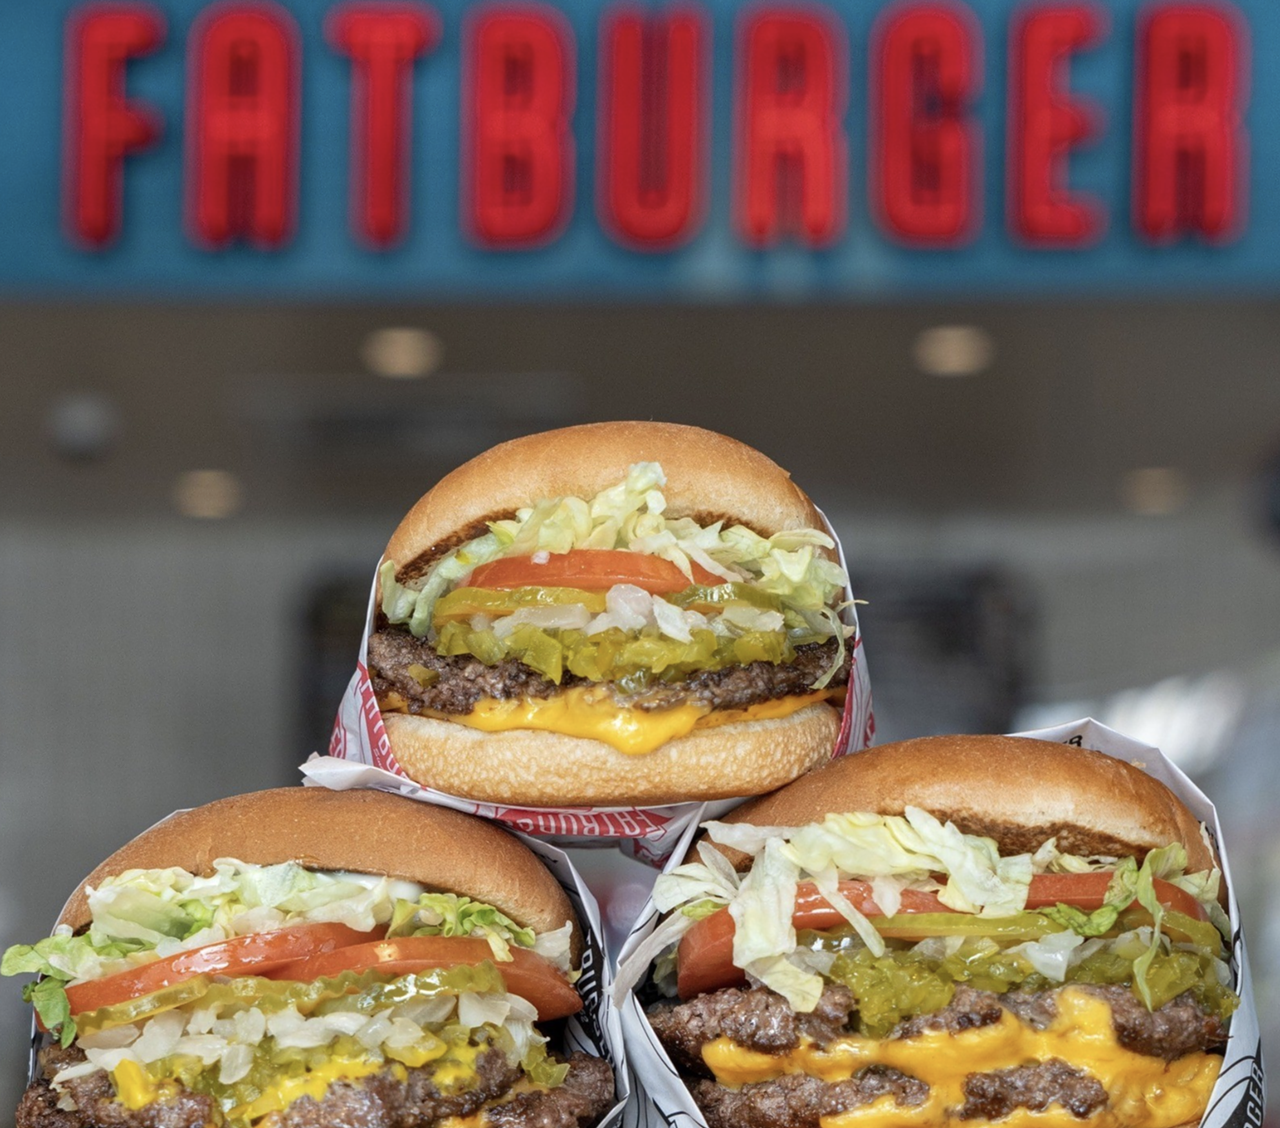 Fatburger  
No exact address announced
Last summer, Fatburger’s parent company announced that the popular burger chain plans a return to Tampa Bay. A total of four locations will open throughout Tampa over the next three years, according to a press release. While Fatburger is most known for its fresh, made-to-order burgers (and iconic rap references by Ice Cube and Biggie). other offerings on the menu include milkshakes, sides like fries and onion rings, chicken sandwiches, vegan options like it's Impossible burger, and a keto-friendly bunless “skinny burger.”
Photo via Fatburger/Facebook